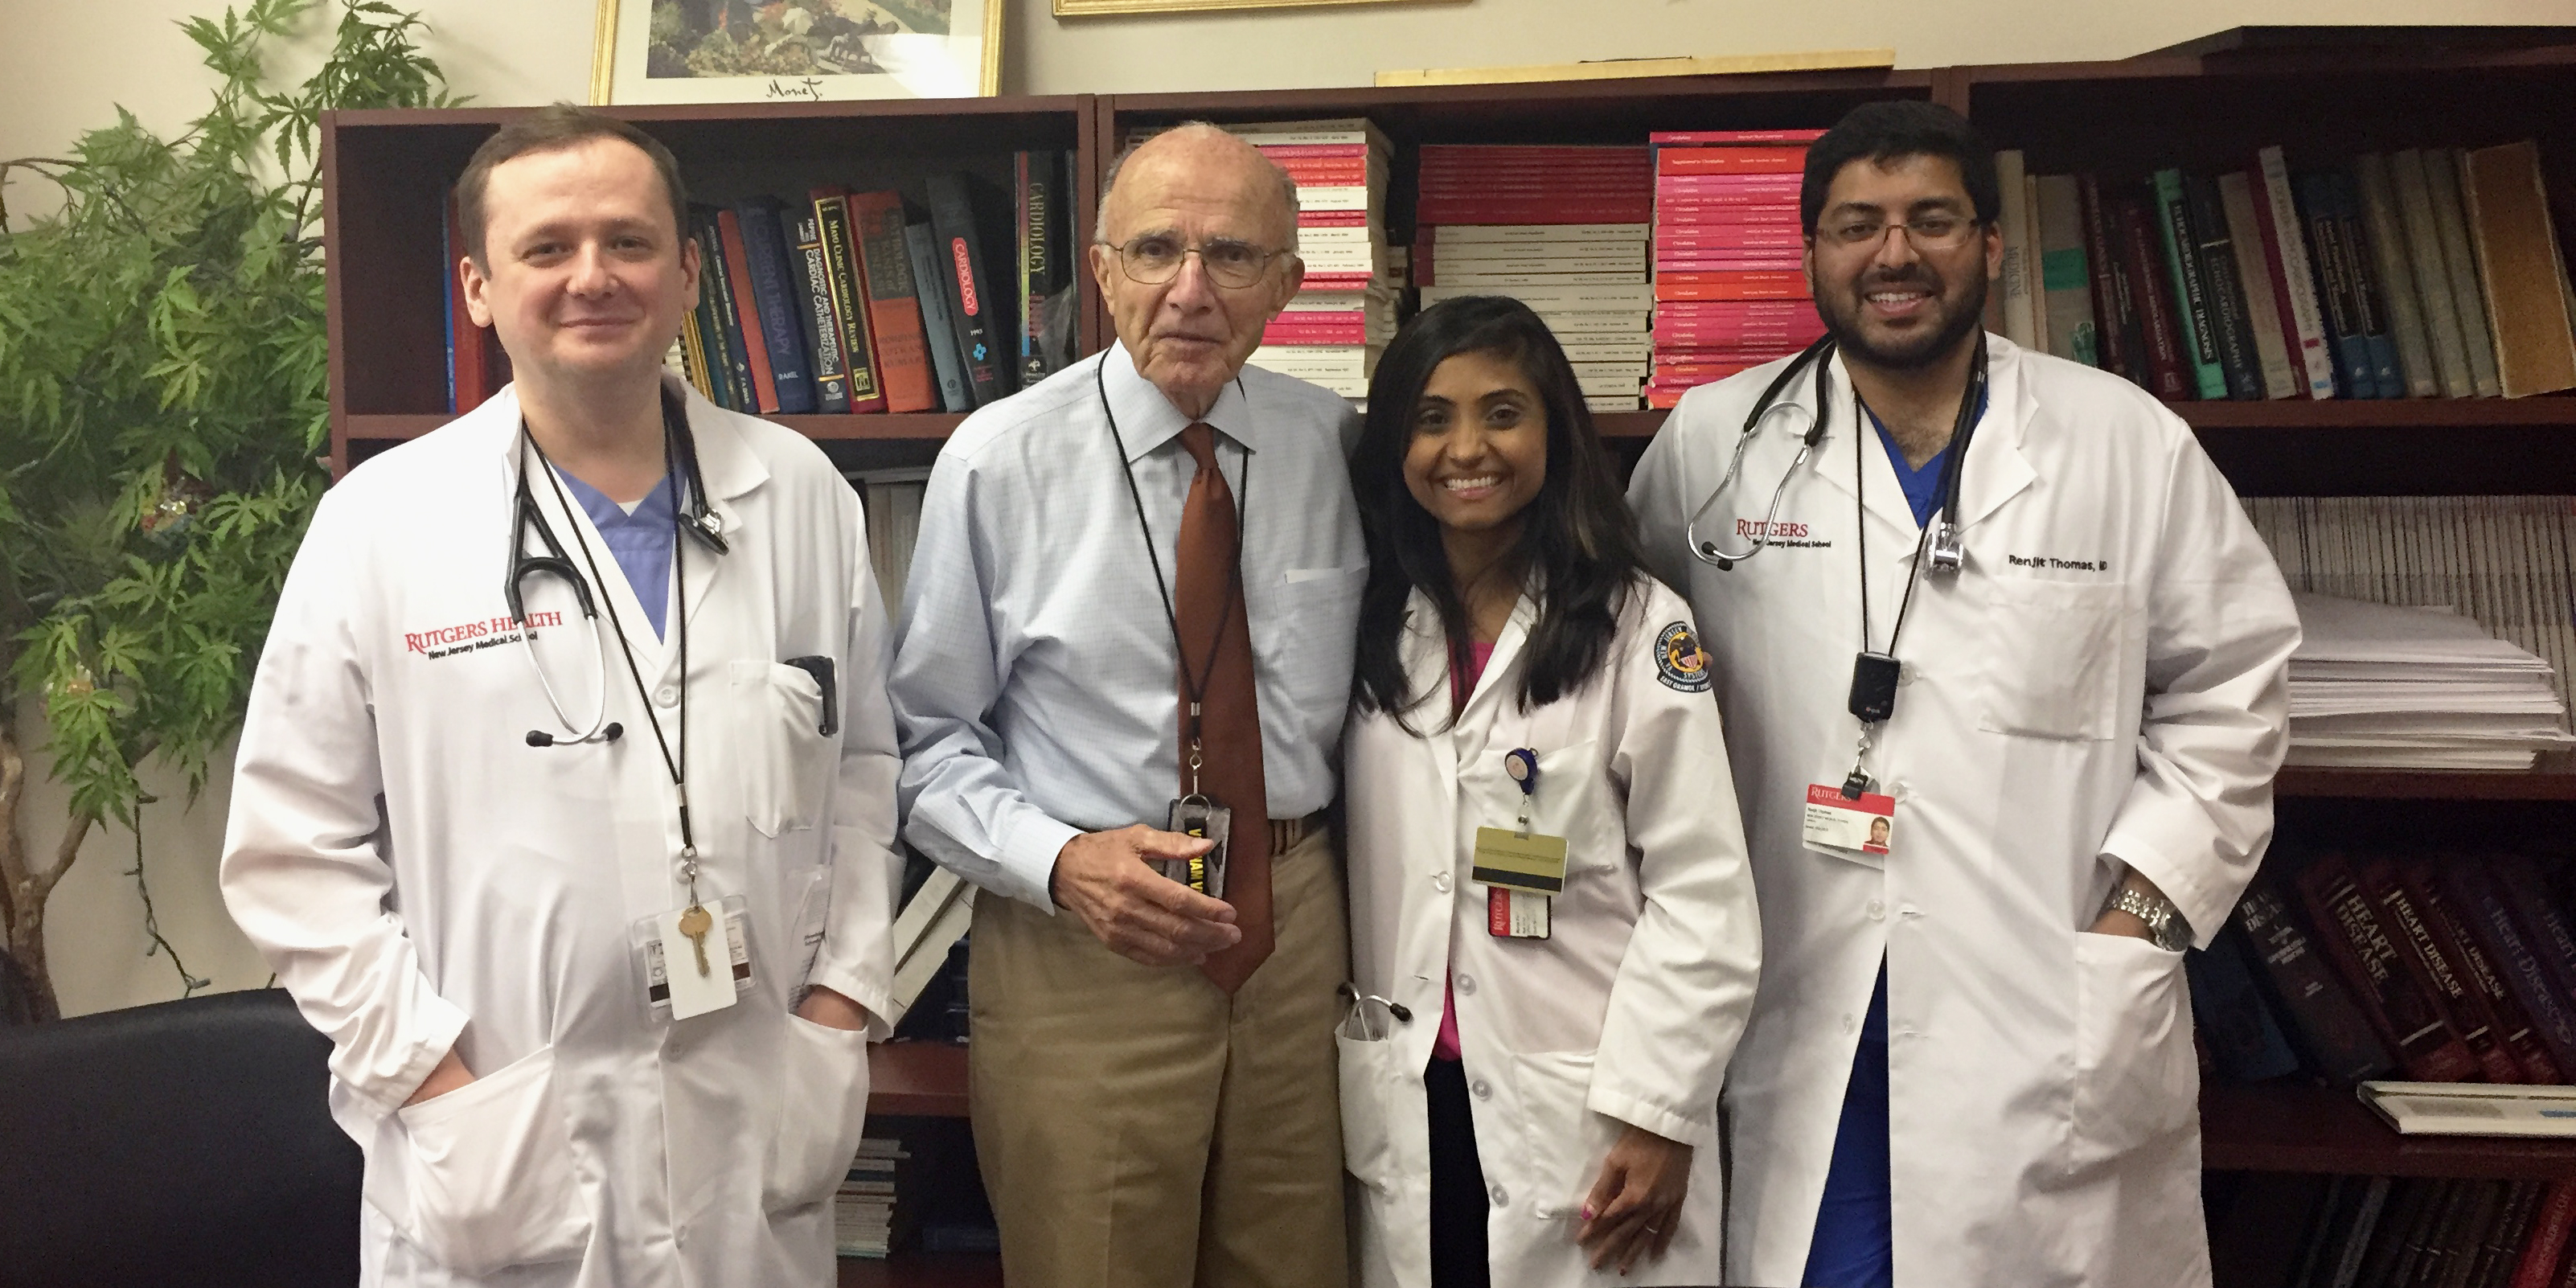 Dr. Maher w/ Fellows